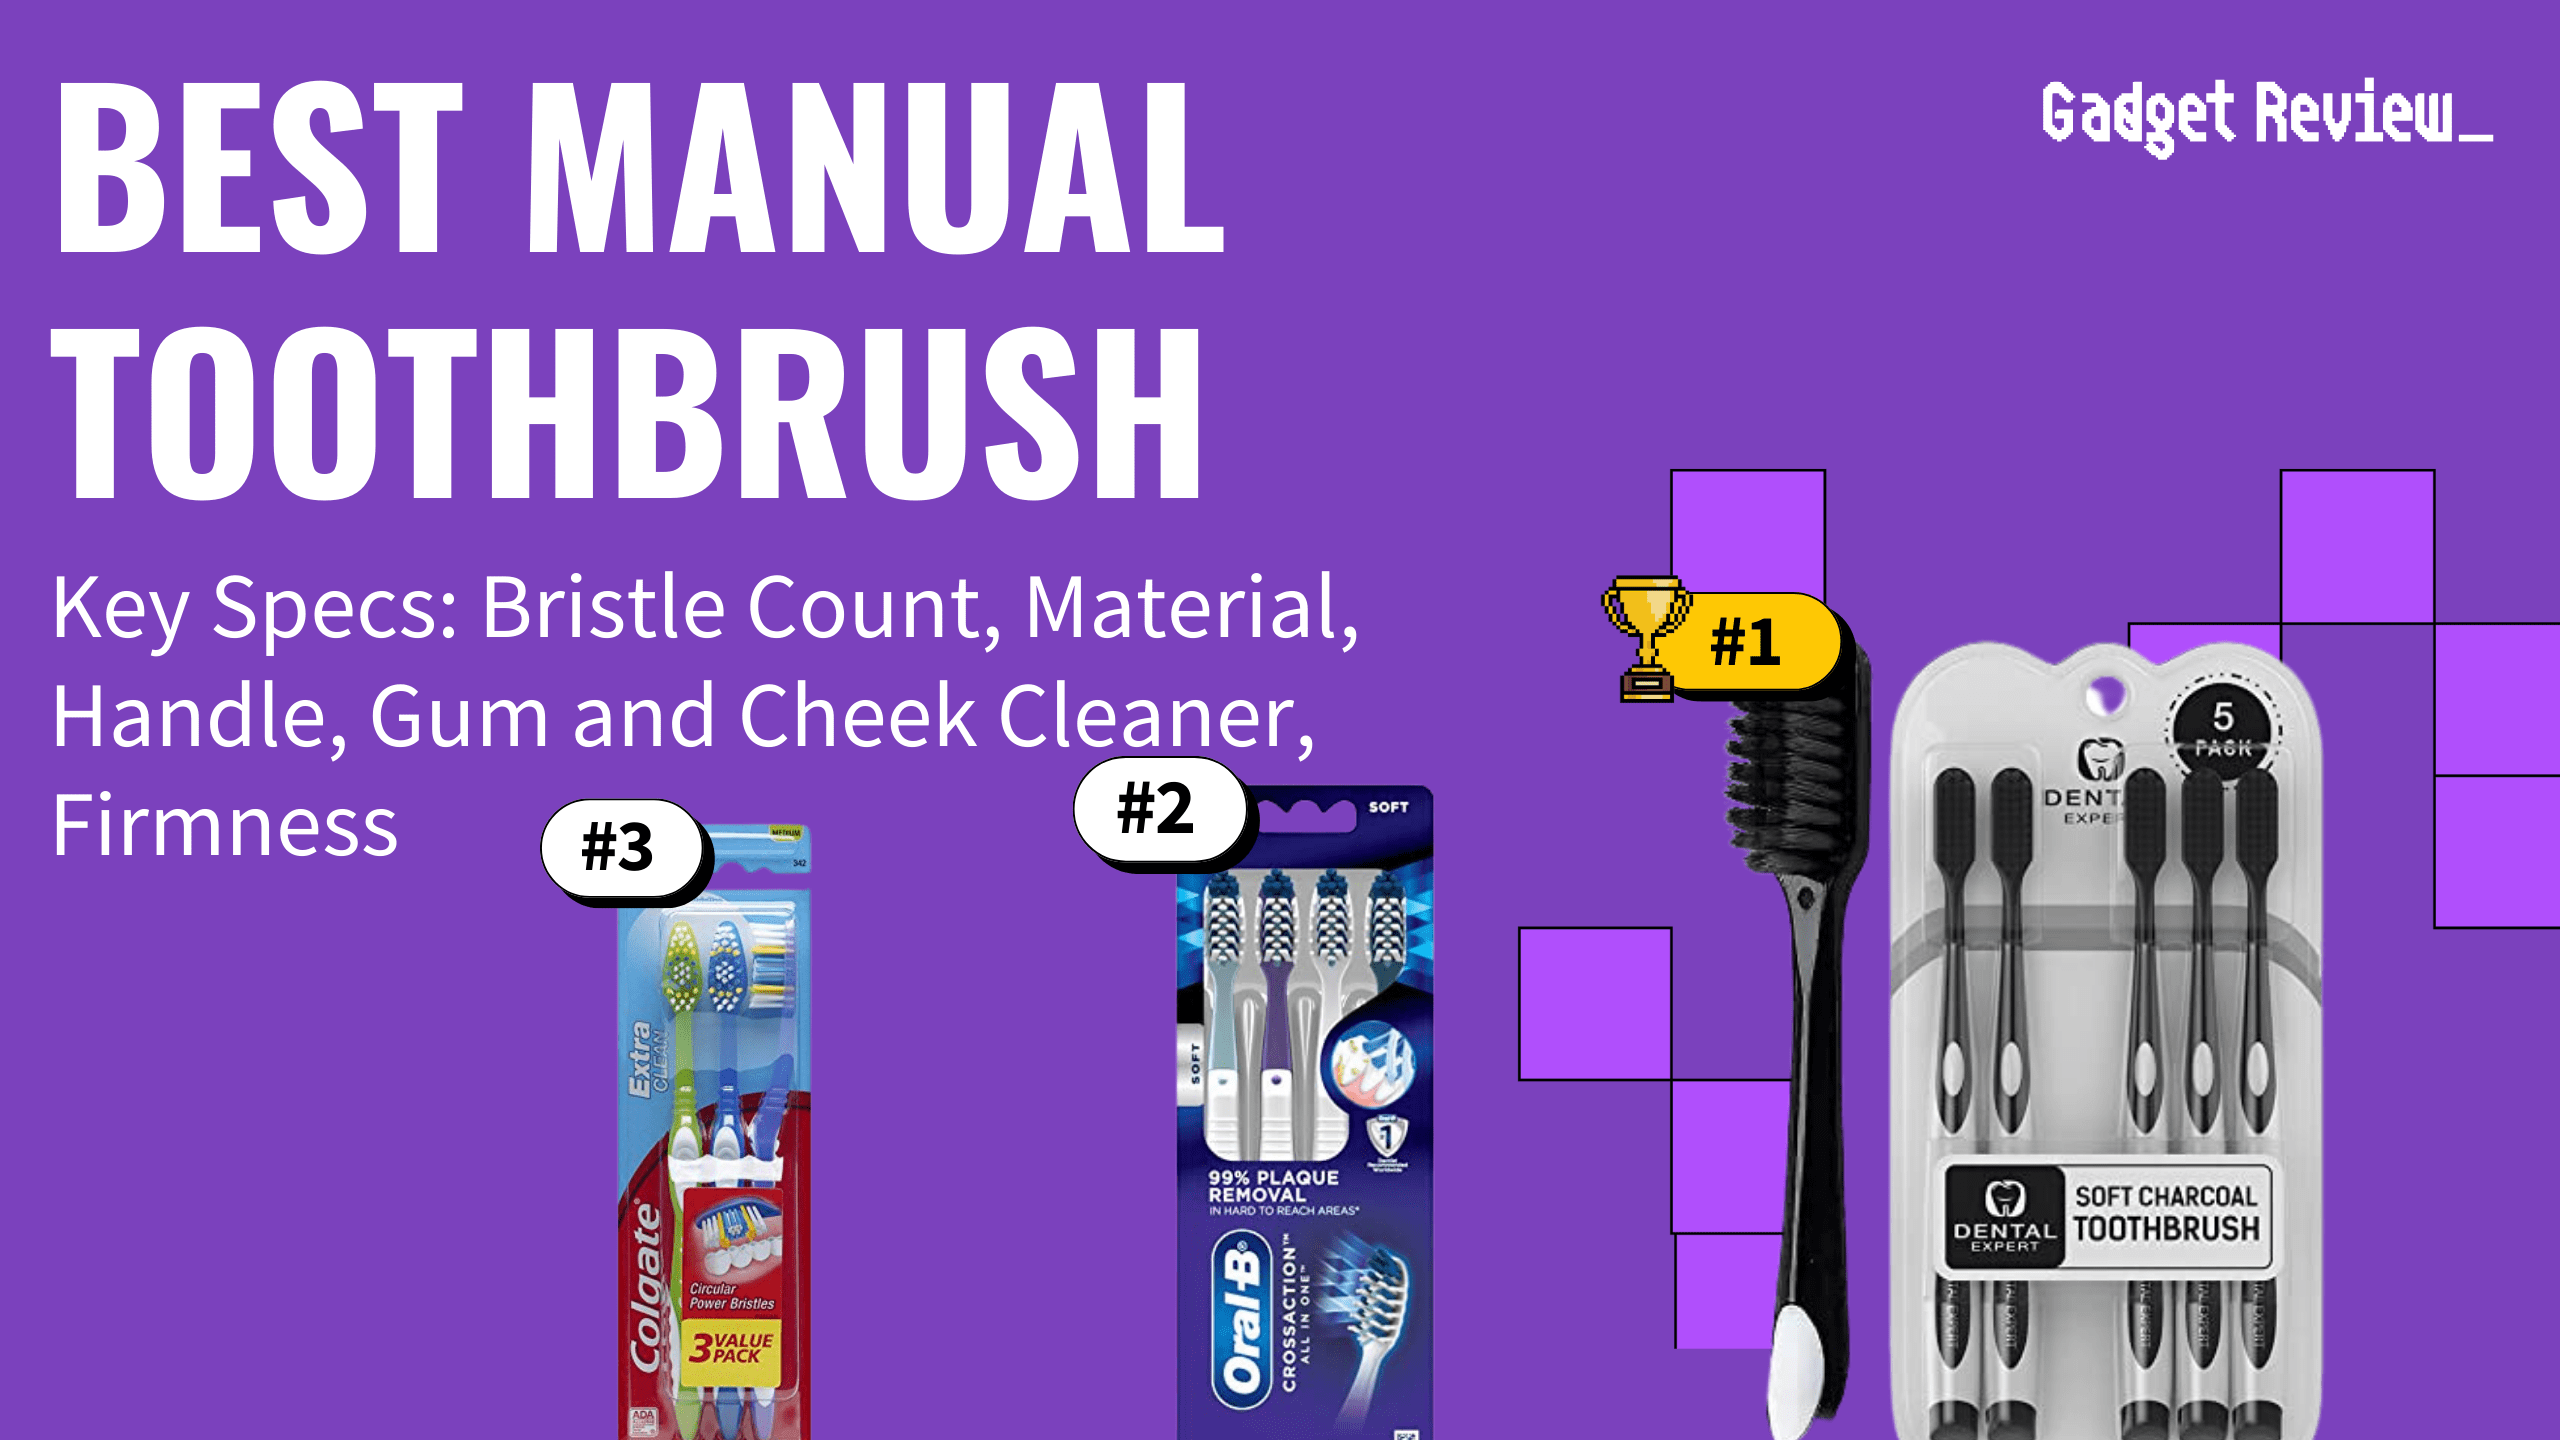 best manual toothbrush featured image that shows the top three best bathroom essential models